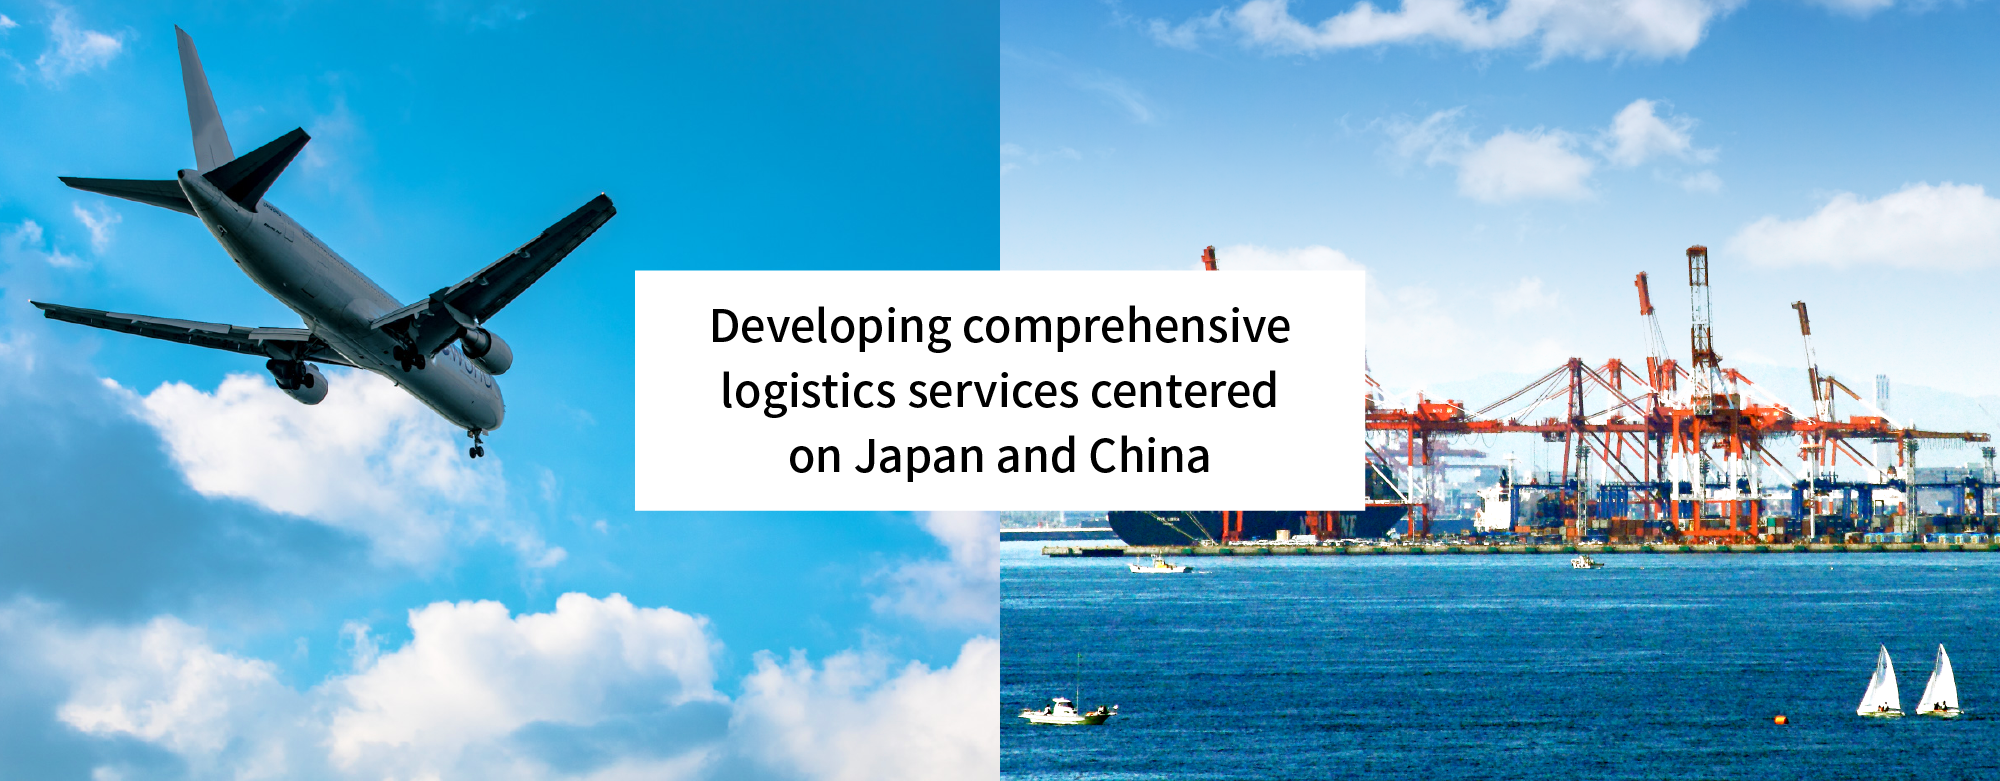 Developing comprehensive logistics services centered on Japan and China